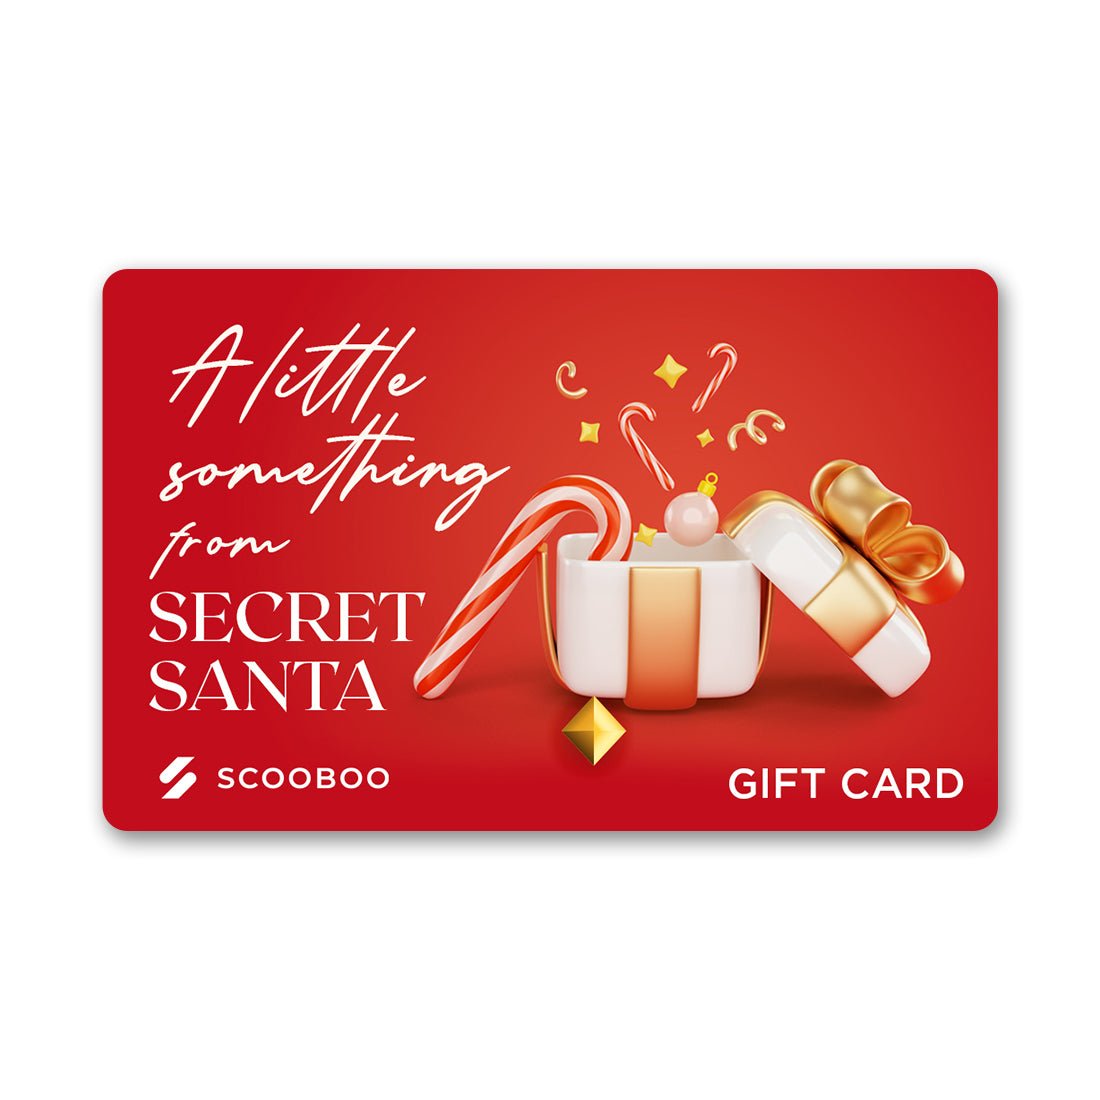 How Do I Convert Gift Cards to Cash? - SekiApp